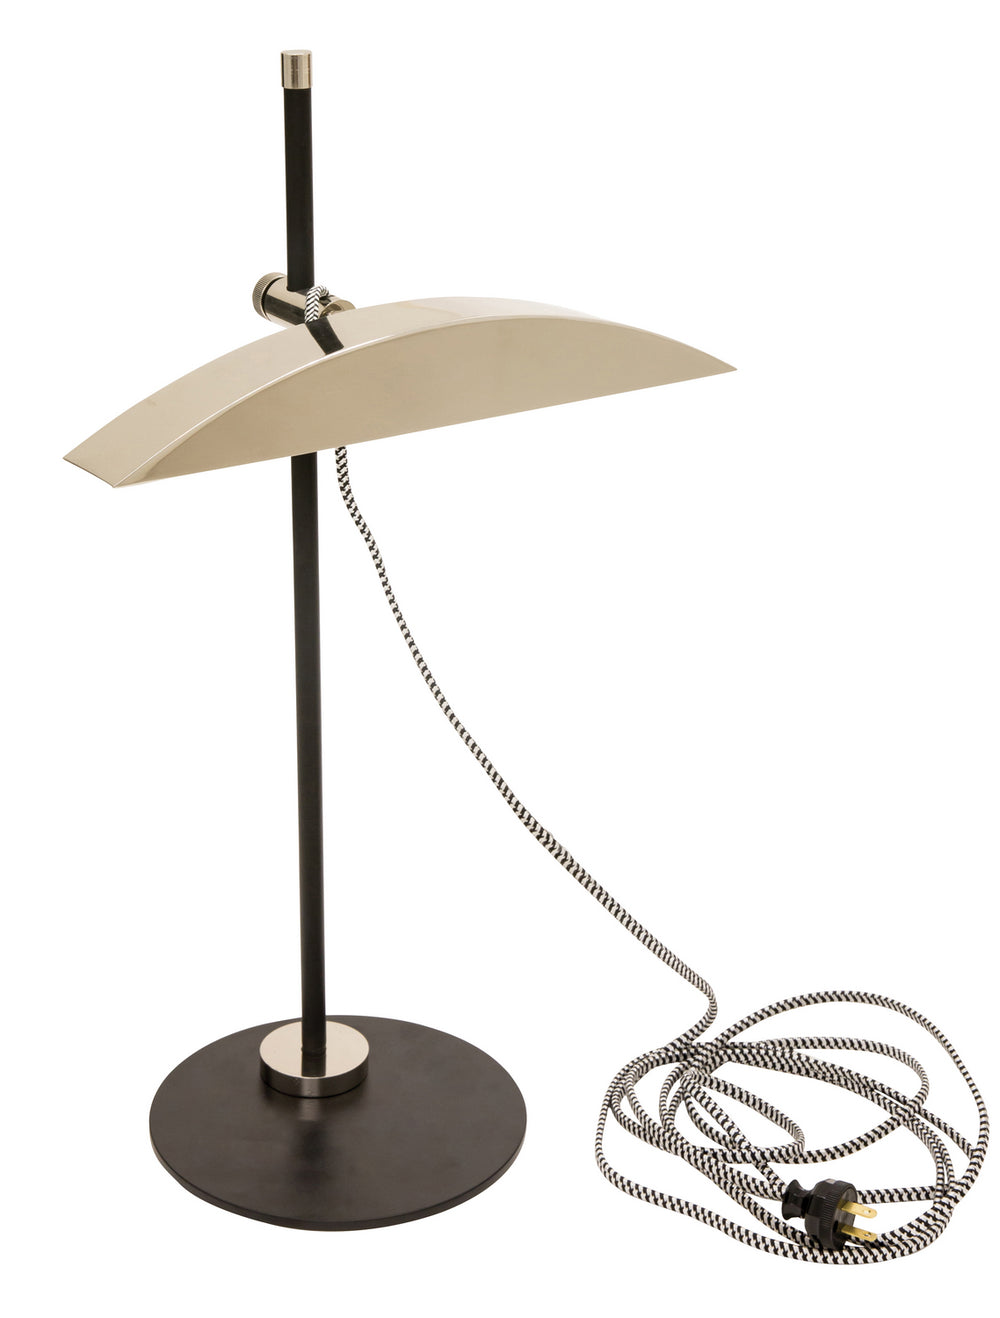 House of Troy - DSK500-BLKPN - LED Table Lamp - Piano/Desk - Matte Black With Polished Nickel Accents